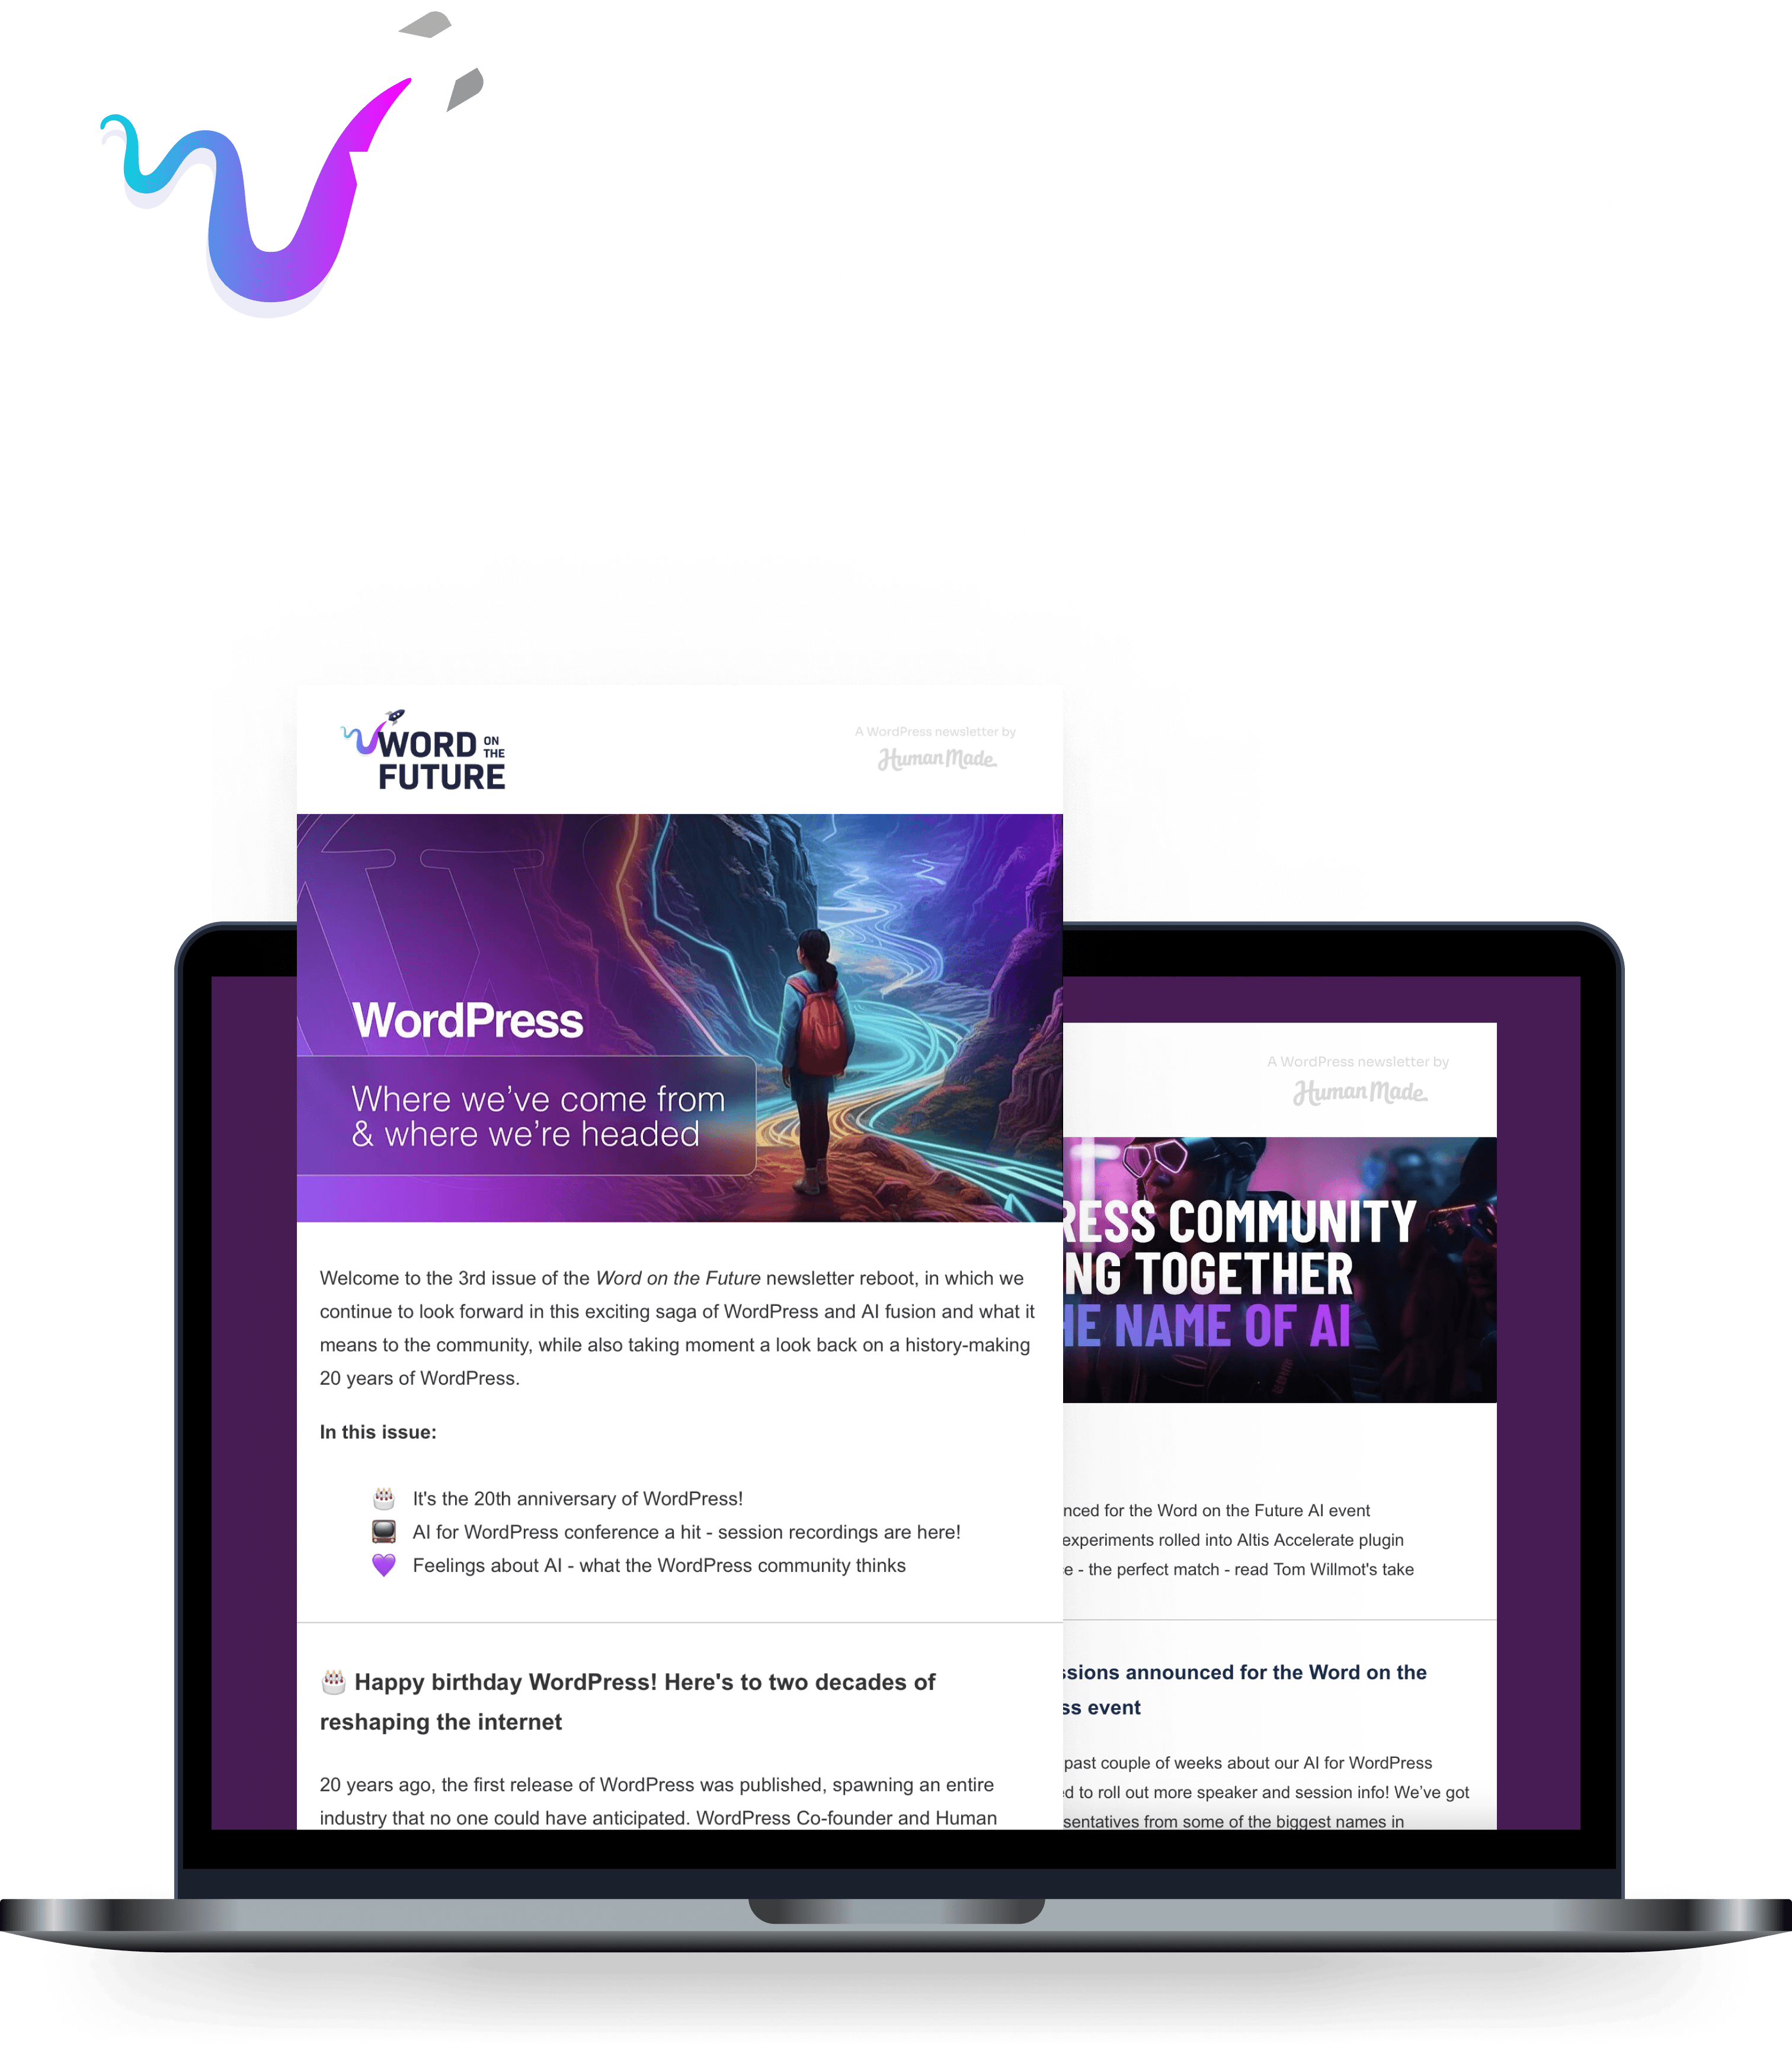 Word on the Future `WordPress newsletter - sign up for more higher ed events